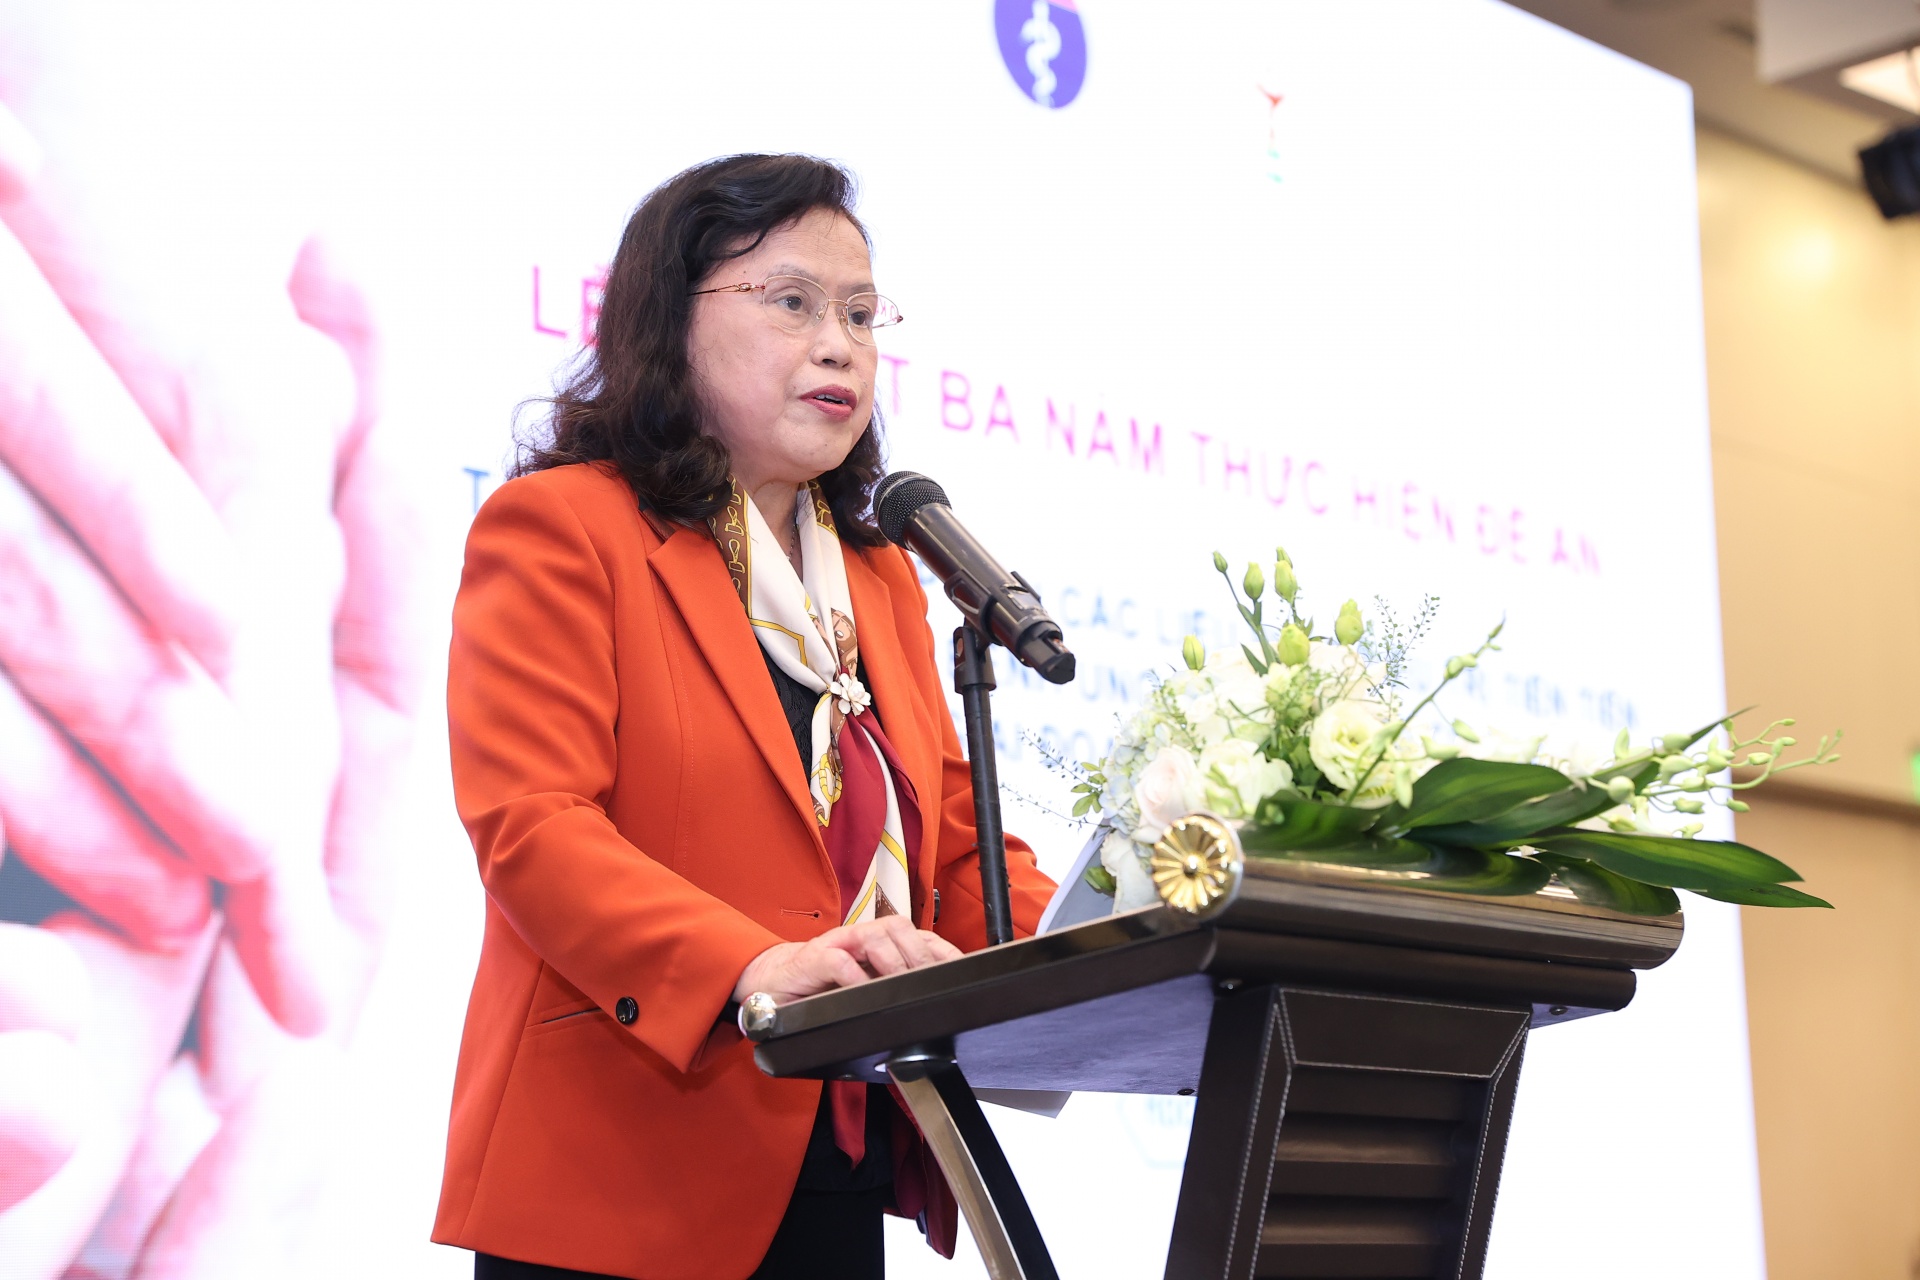 Significant progress has been made in Vietnam's breast cancer fight